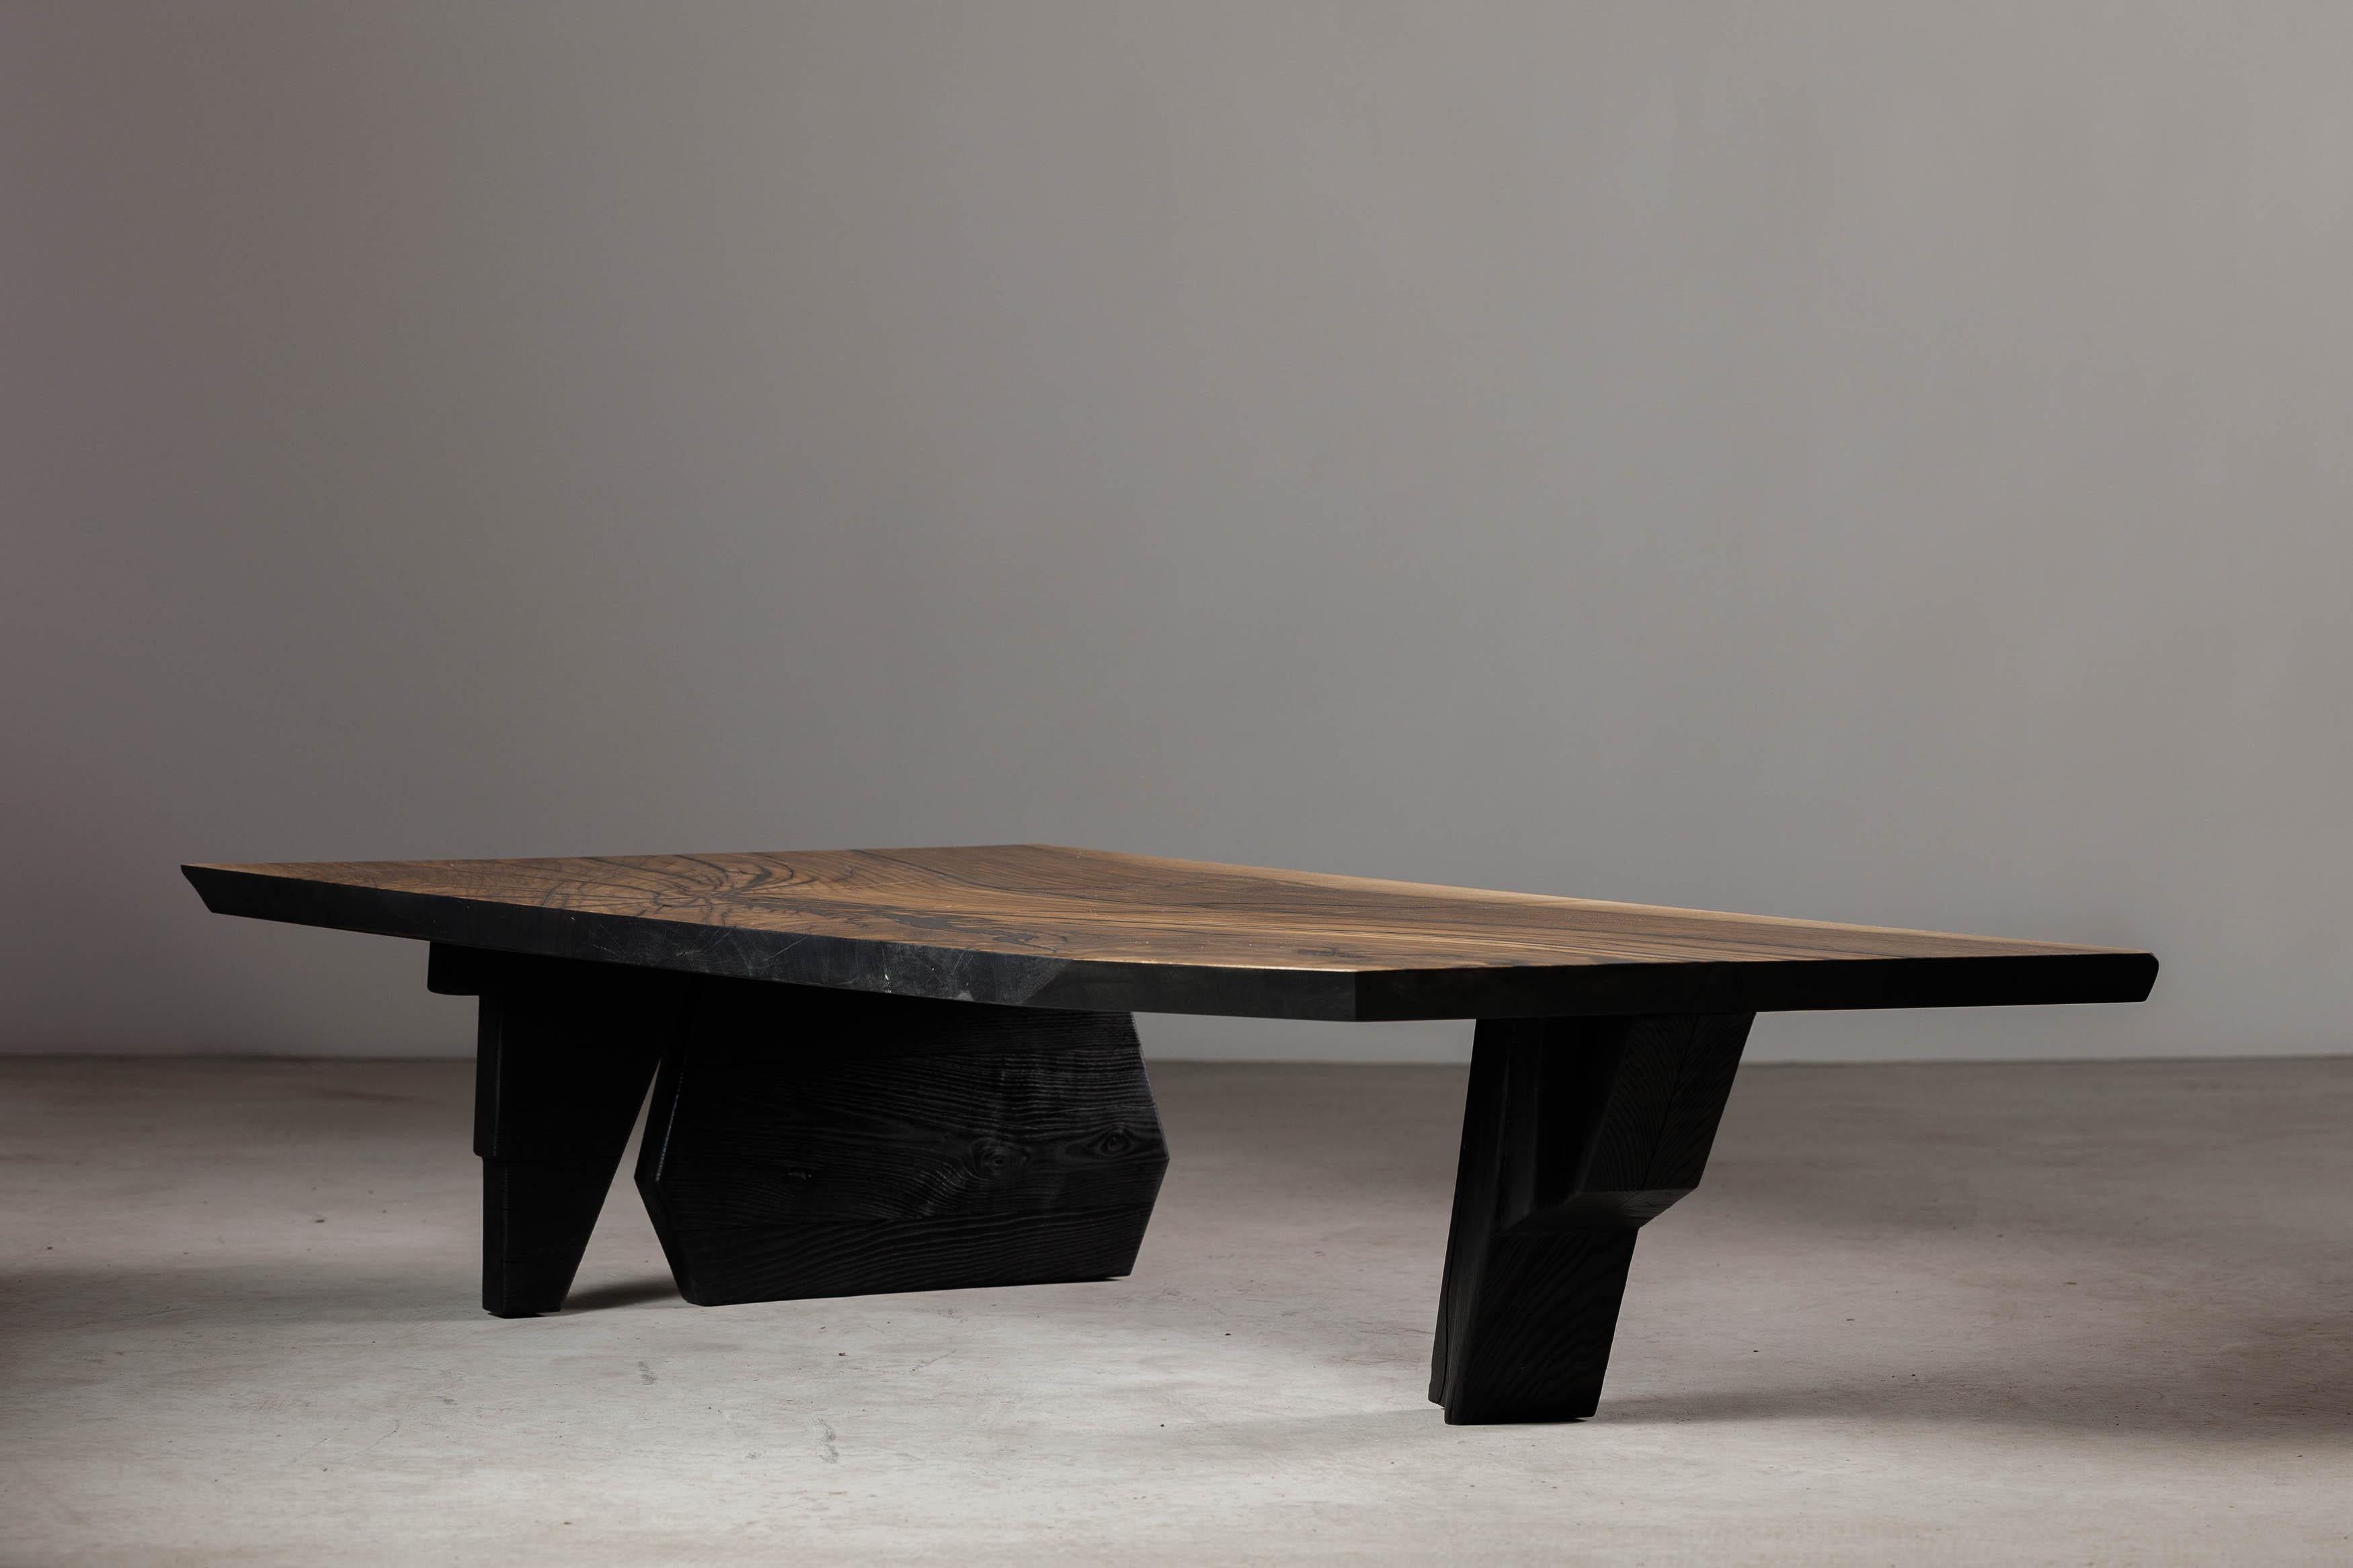 EM105 coffee table by Eero Moss
One of a kind
Dimensions; W 138 x D 77 x H 33 cm
Materials: Walnut, charred ash, India ink.
Finish: Natural oils.

18 Brut Collection

The latest collection by the artist is a tribute to the brutalist